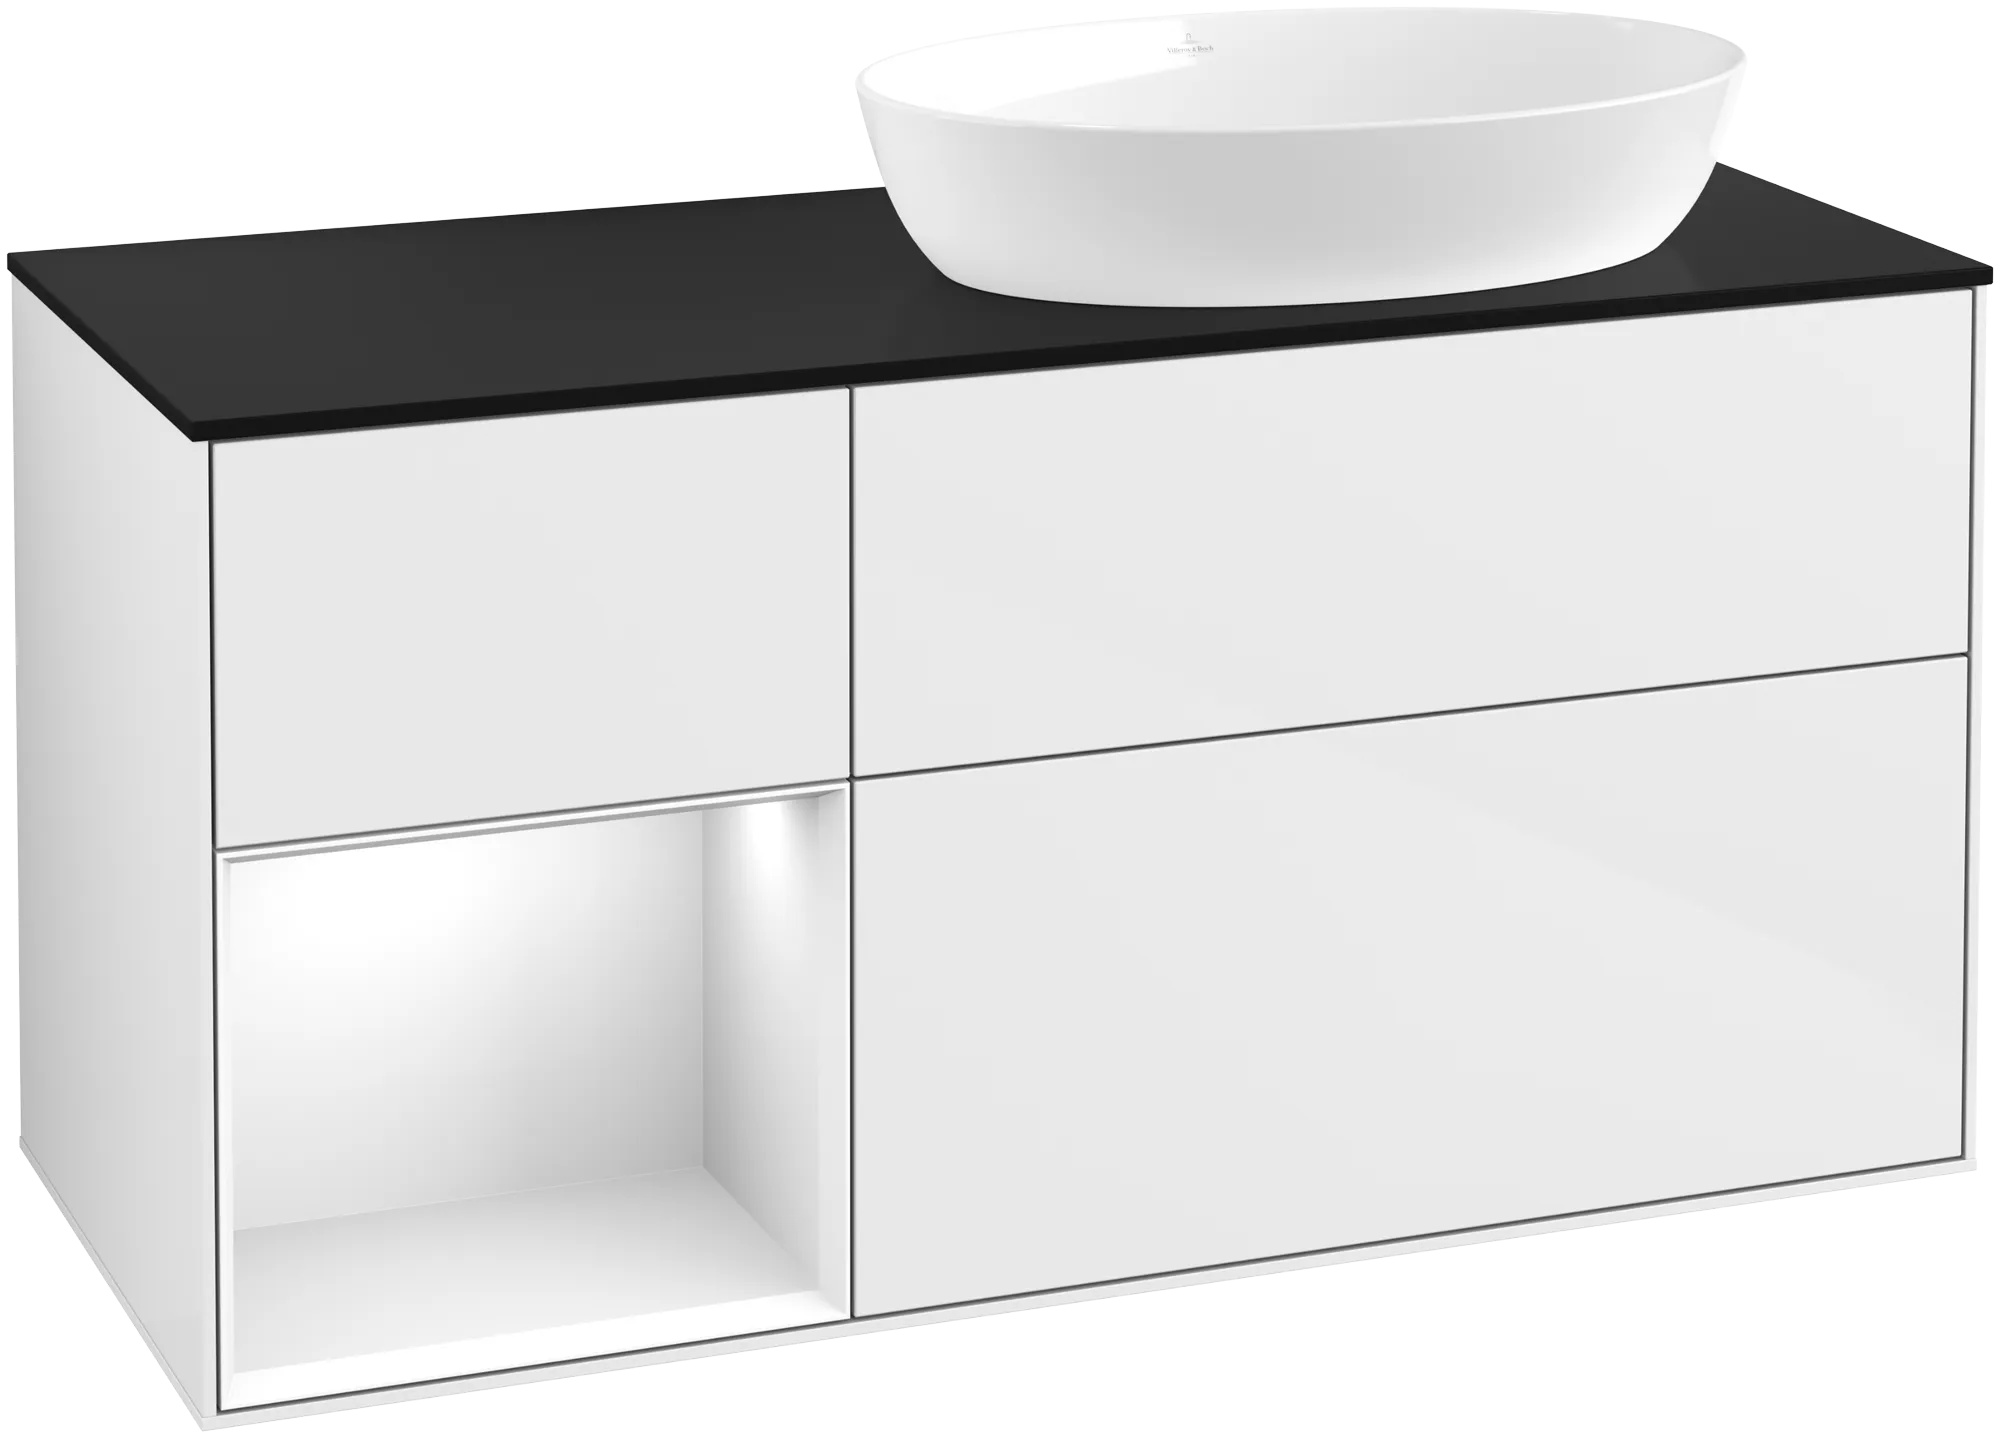 Picture of VILLEROY BOCH Finion Vanity unit, with lighting, 3 pull-out compartments, 1200 x 603 x 501 mm, Glossy White Lacquer / Glossy White Lacquer / Glass Black Matt #GA42GFGF